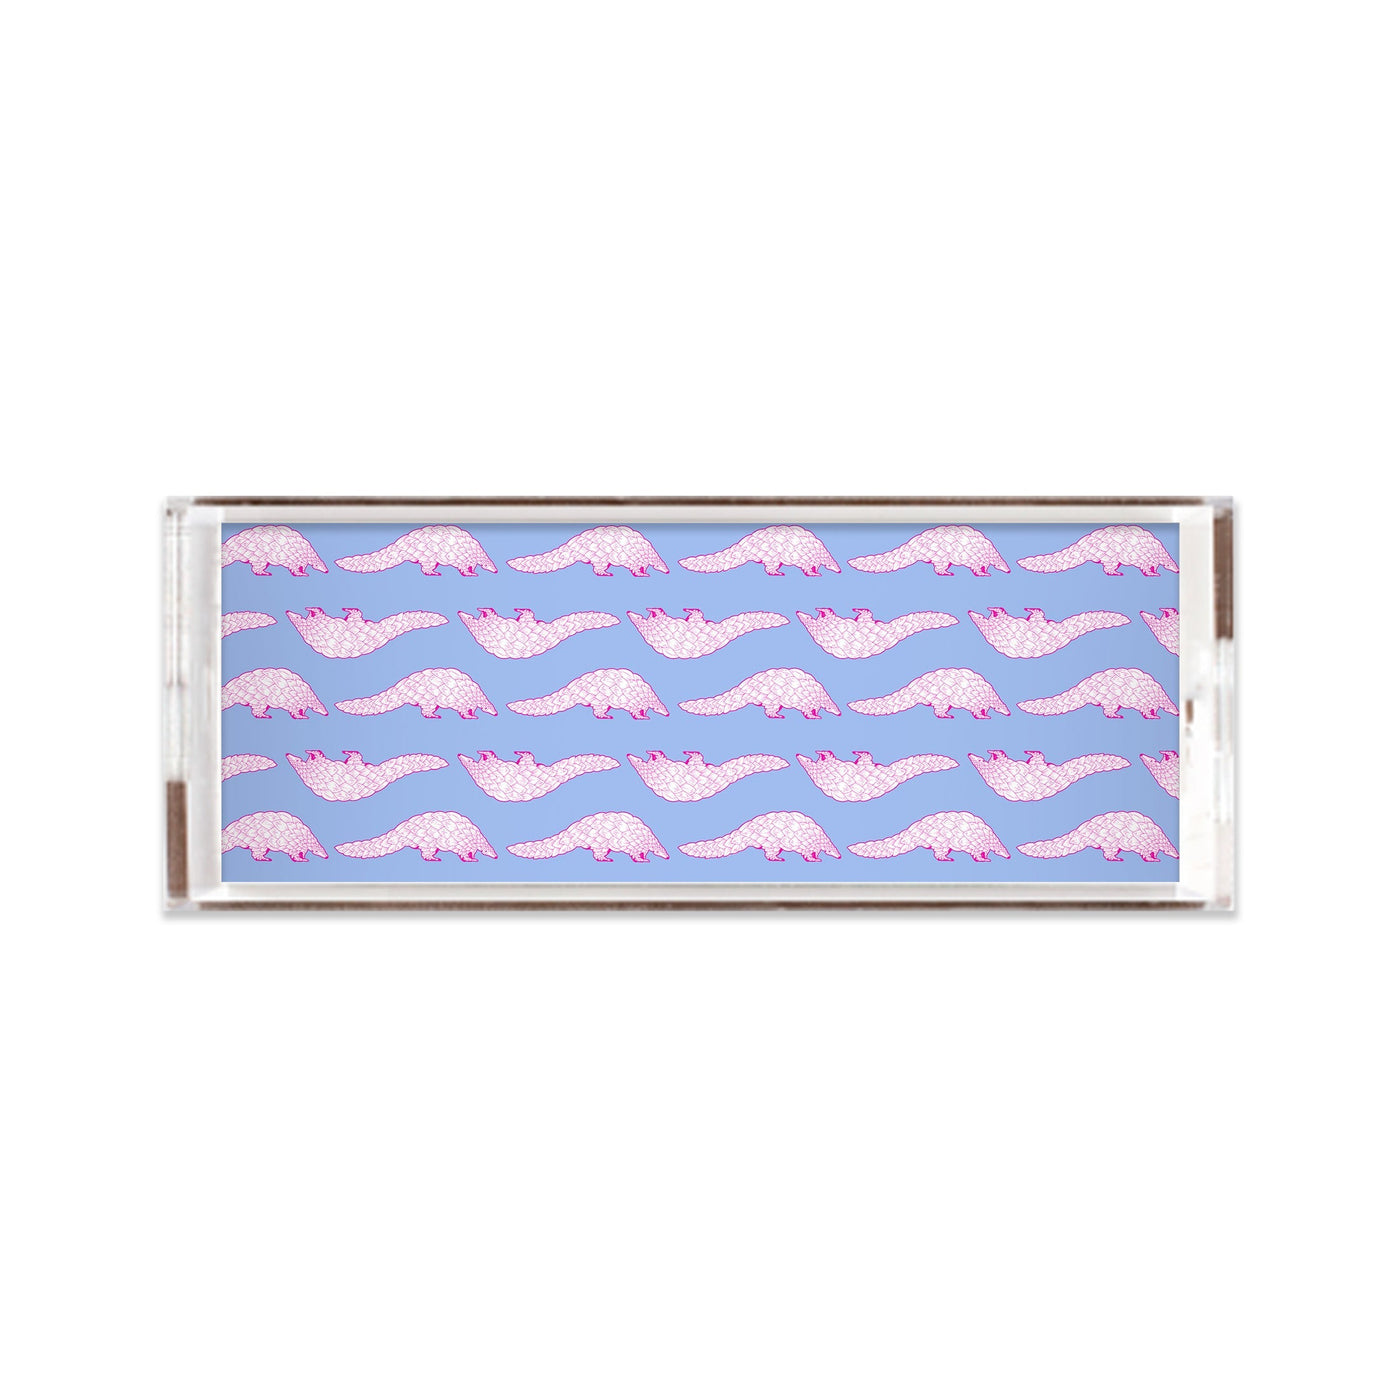 Pangolin Lucite Tray Lucite Trays Light Blue Pink / 11x4 Katie Kime